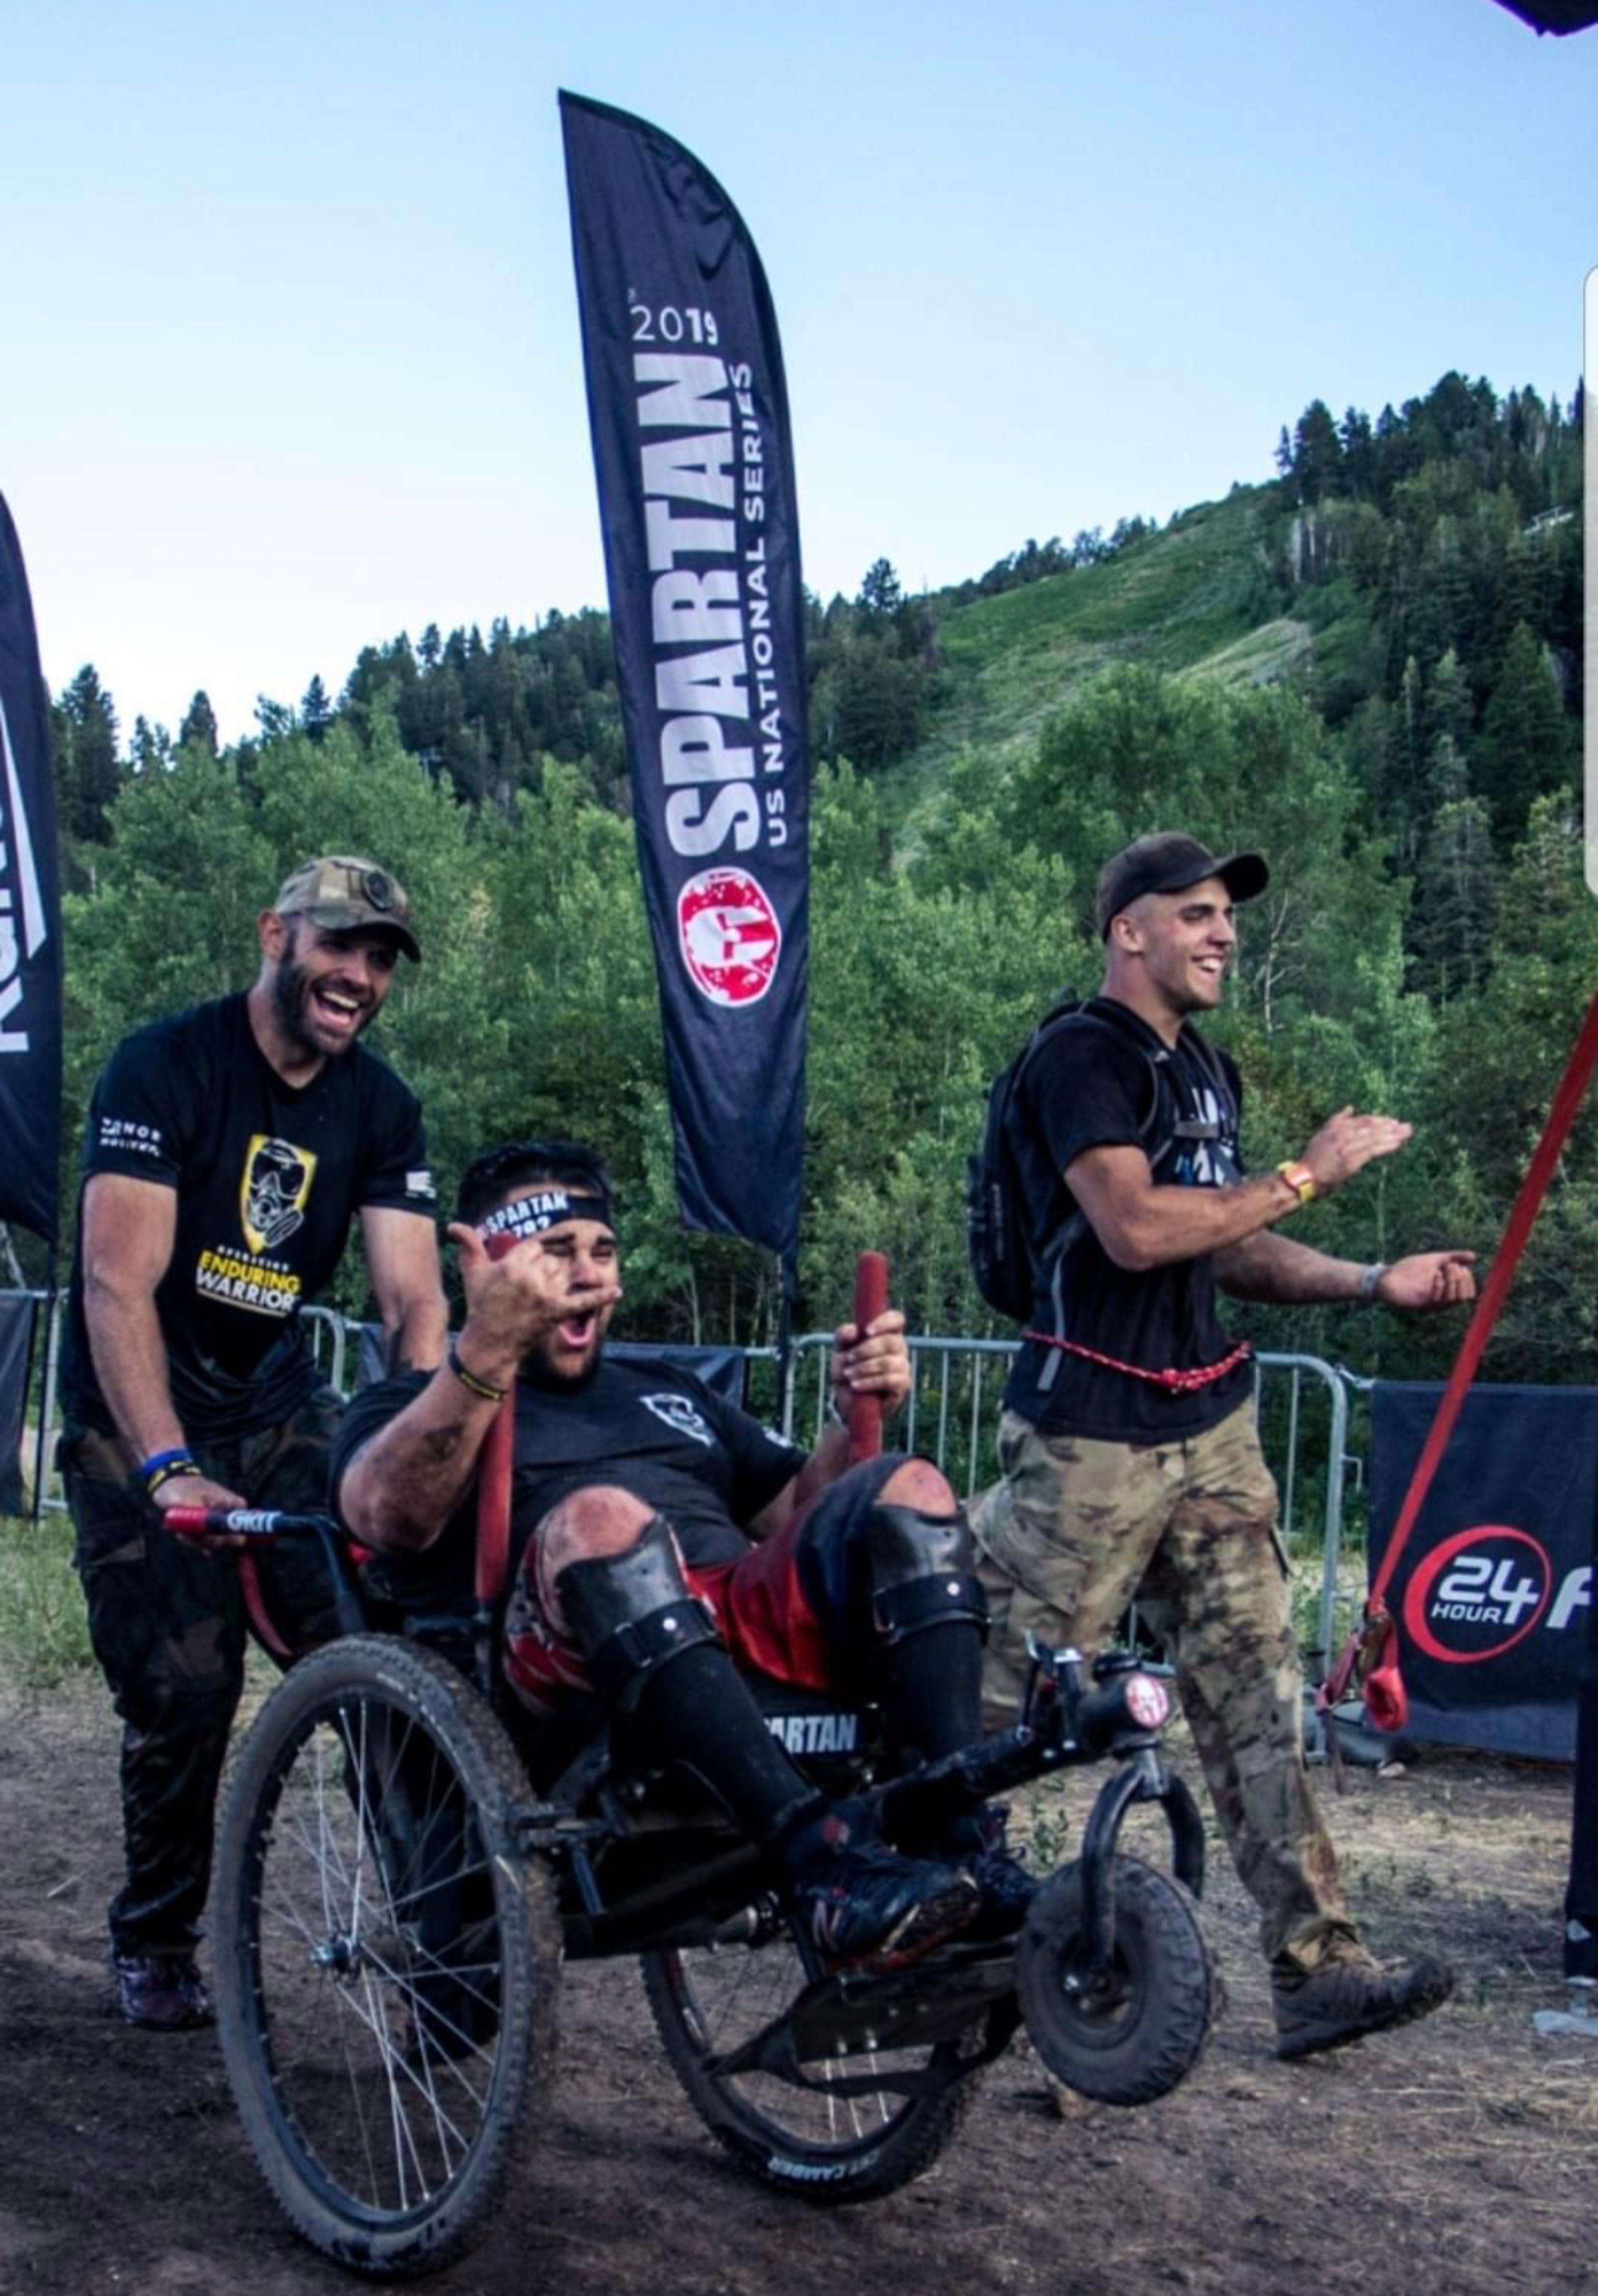 Christopher Wolff crossing the finish line at a Spartan race.